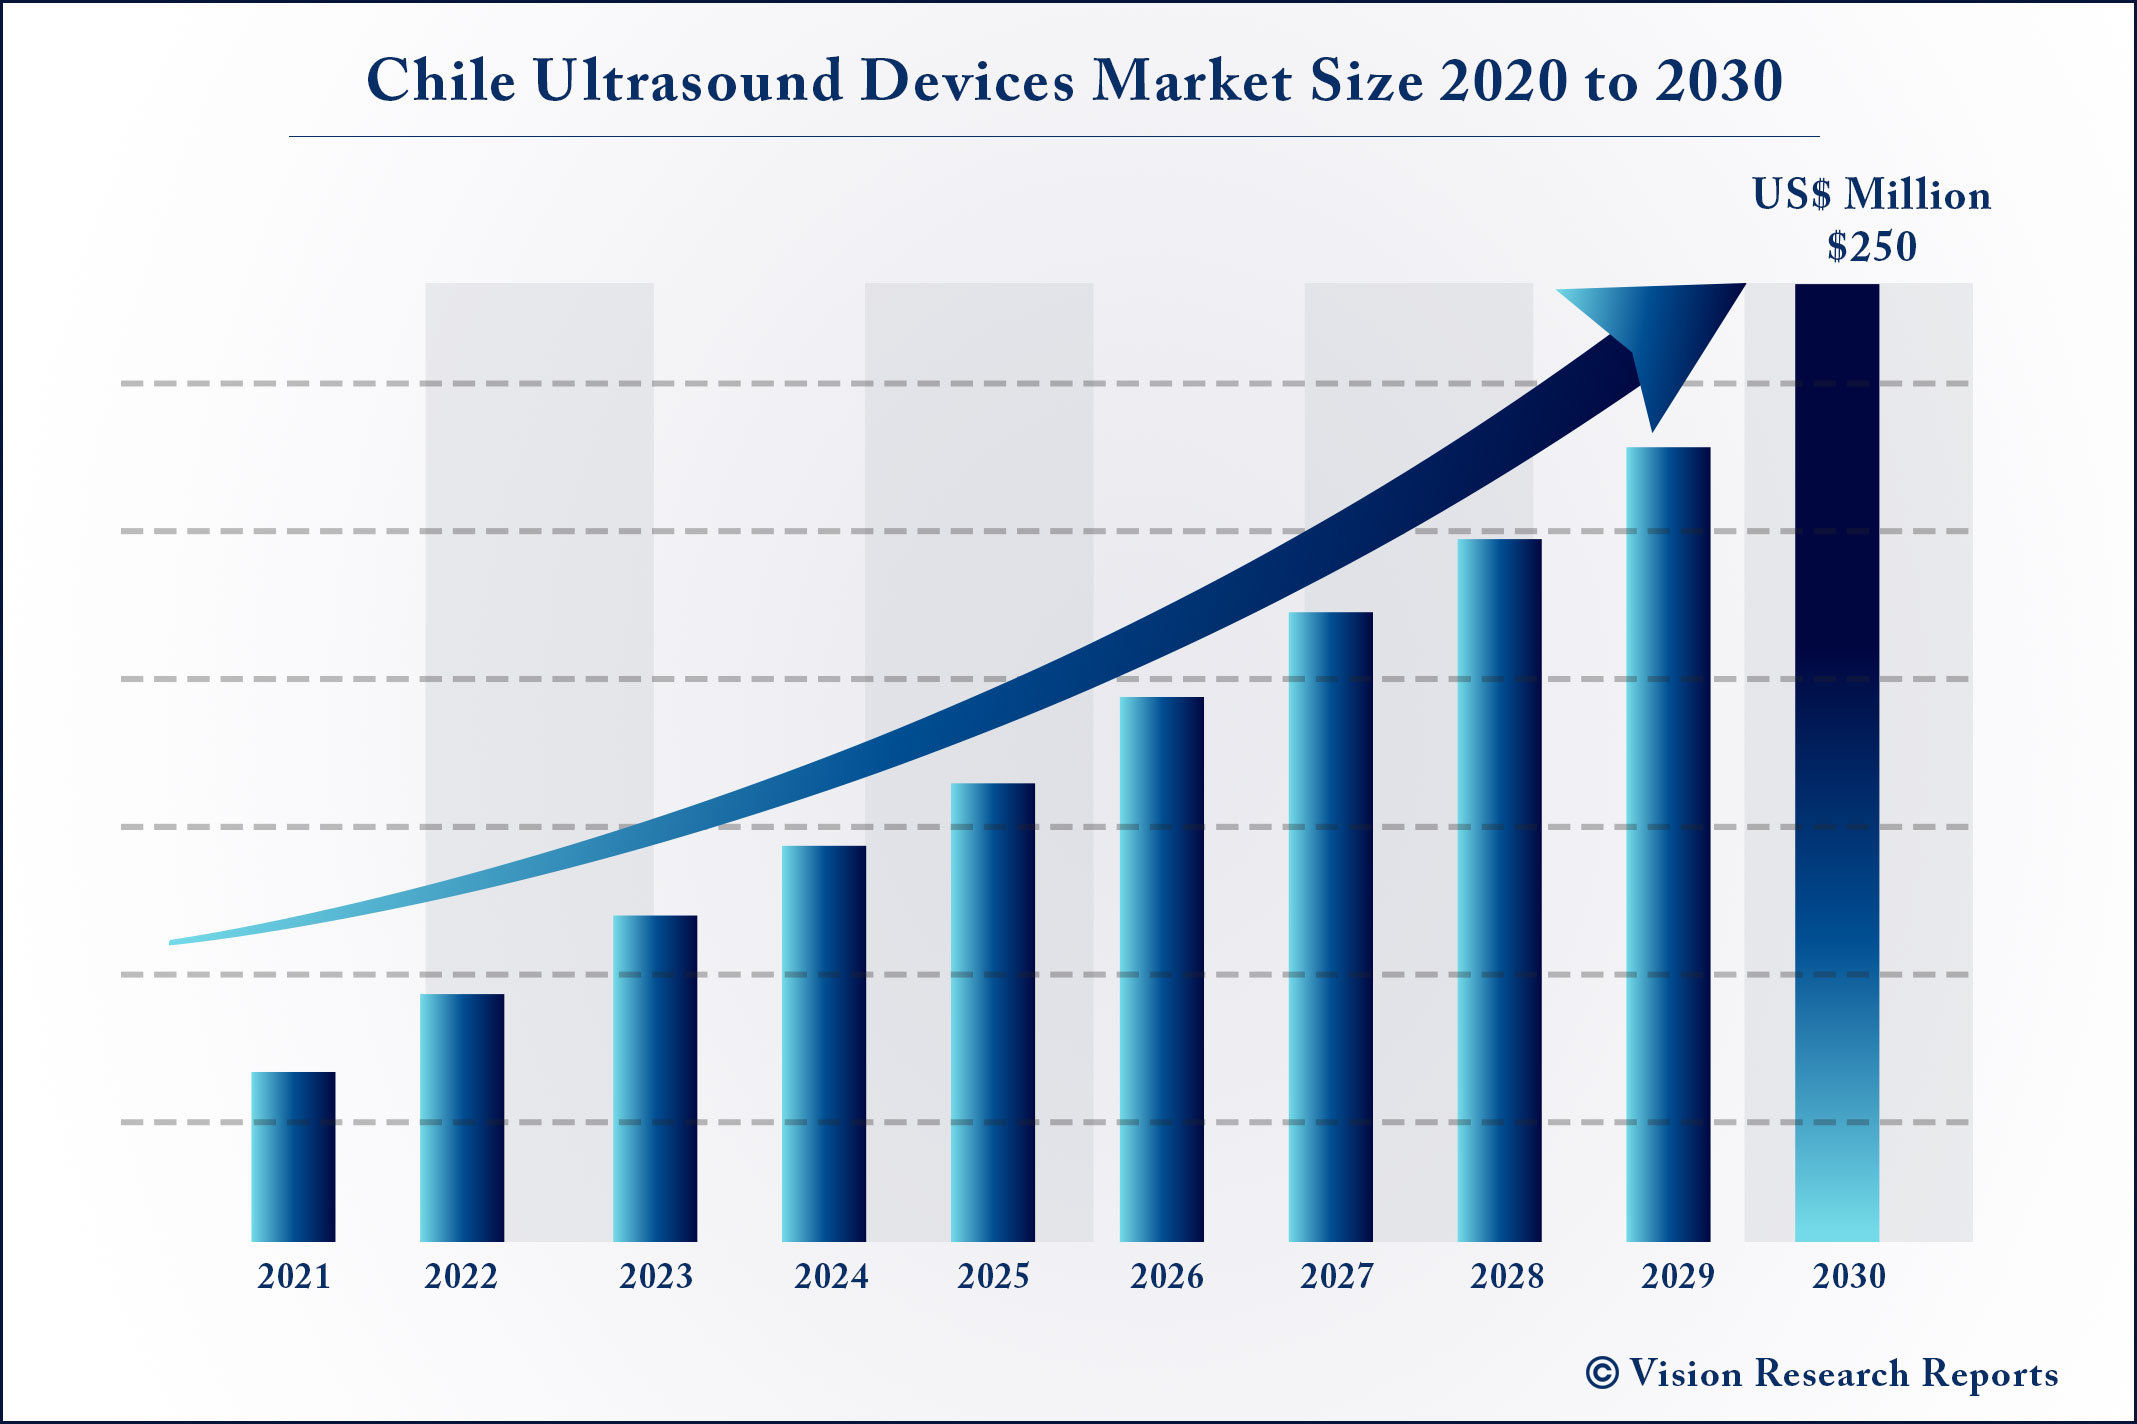 Chile Ultrasound Devices Market Size 2020 to 2030